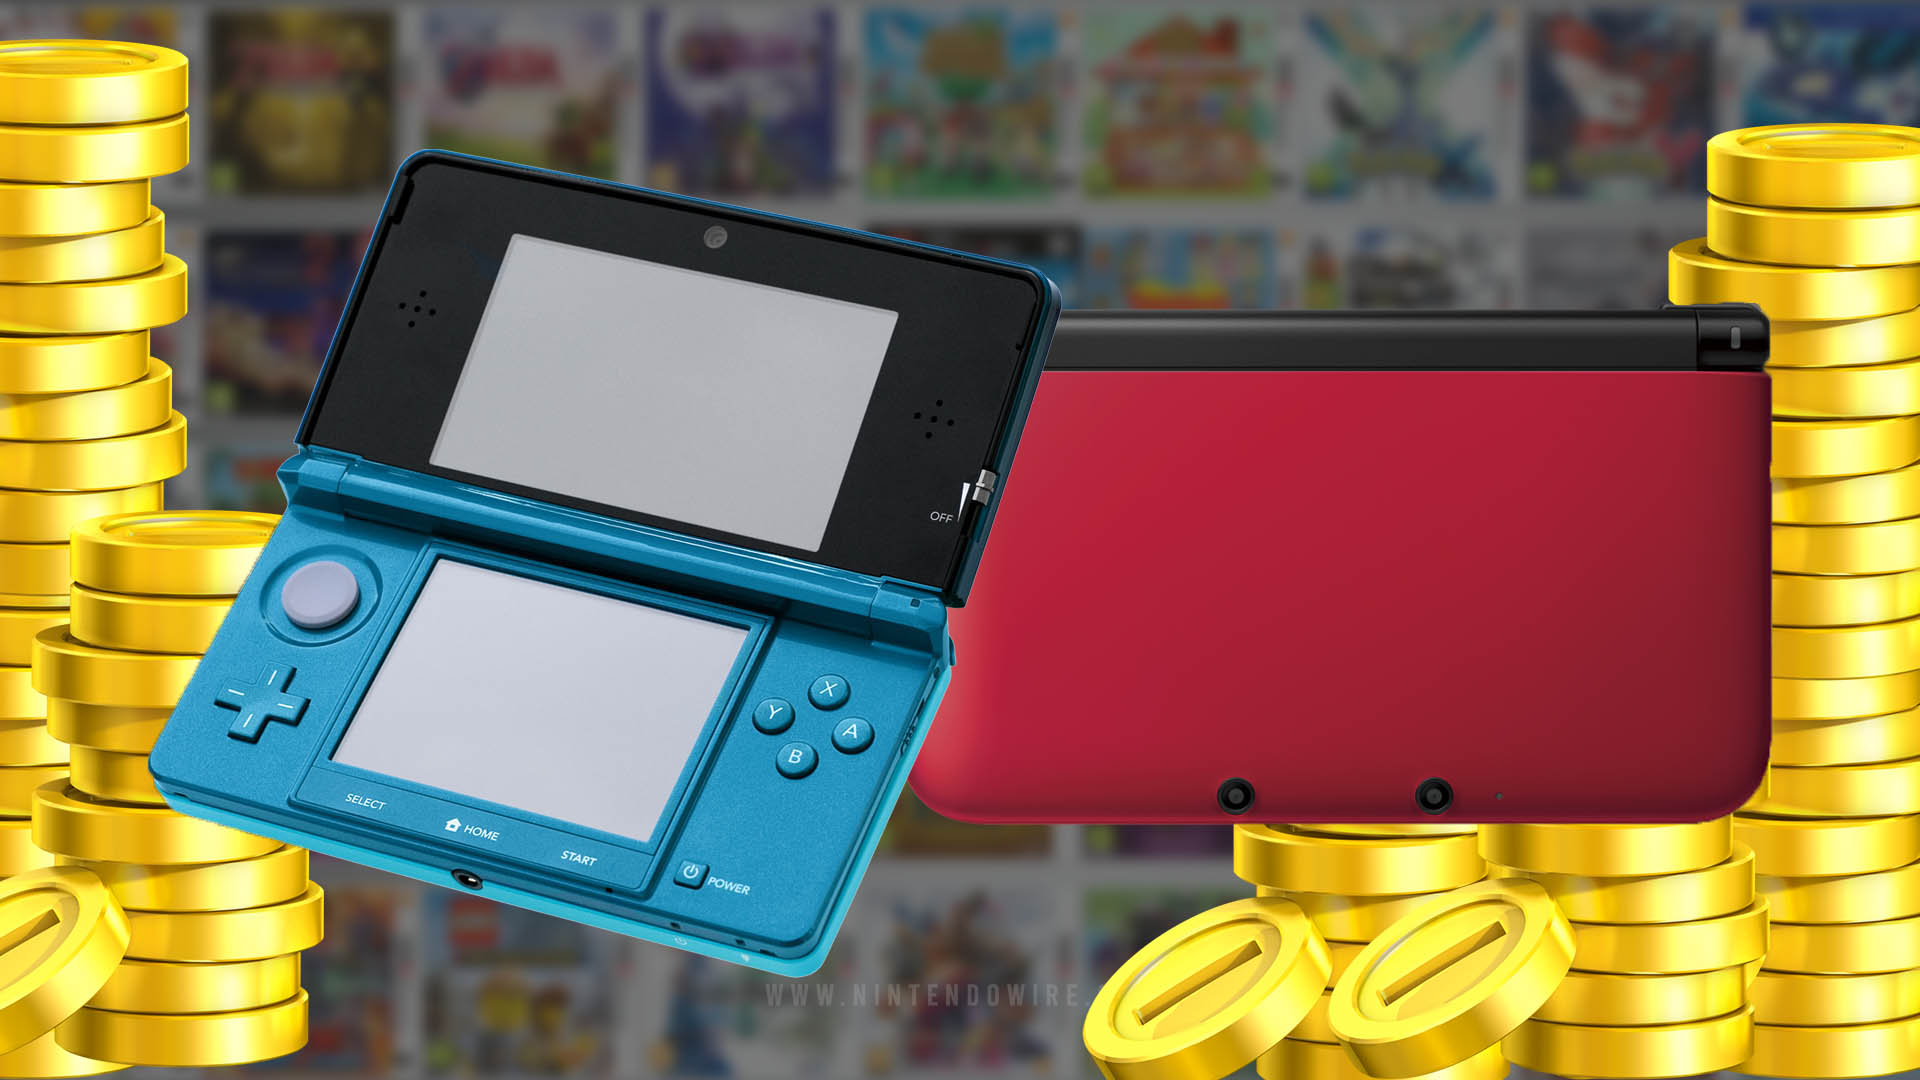 Nintendo 3DS prices have officially gone - Nintendo Wire